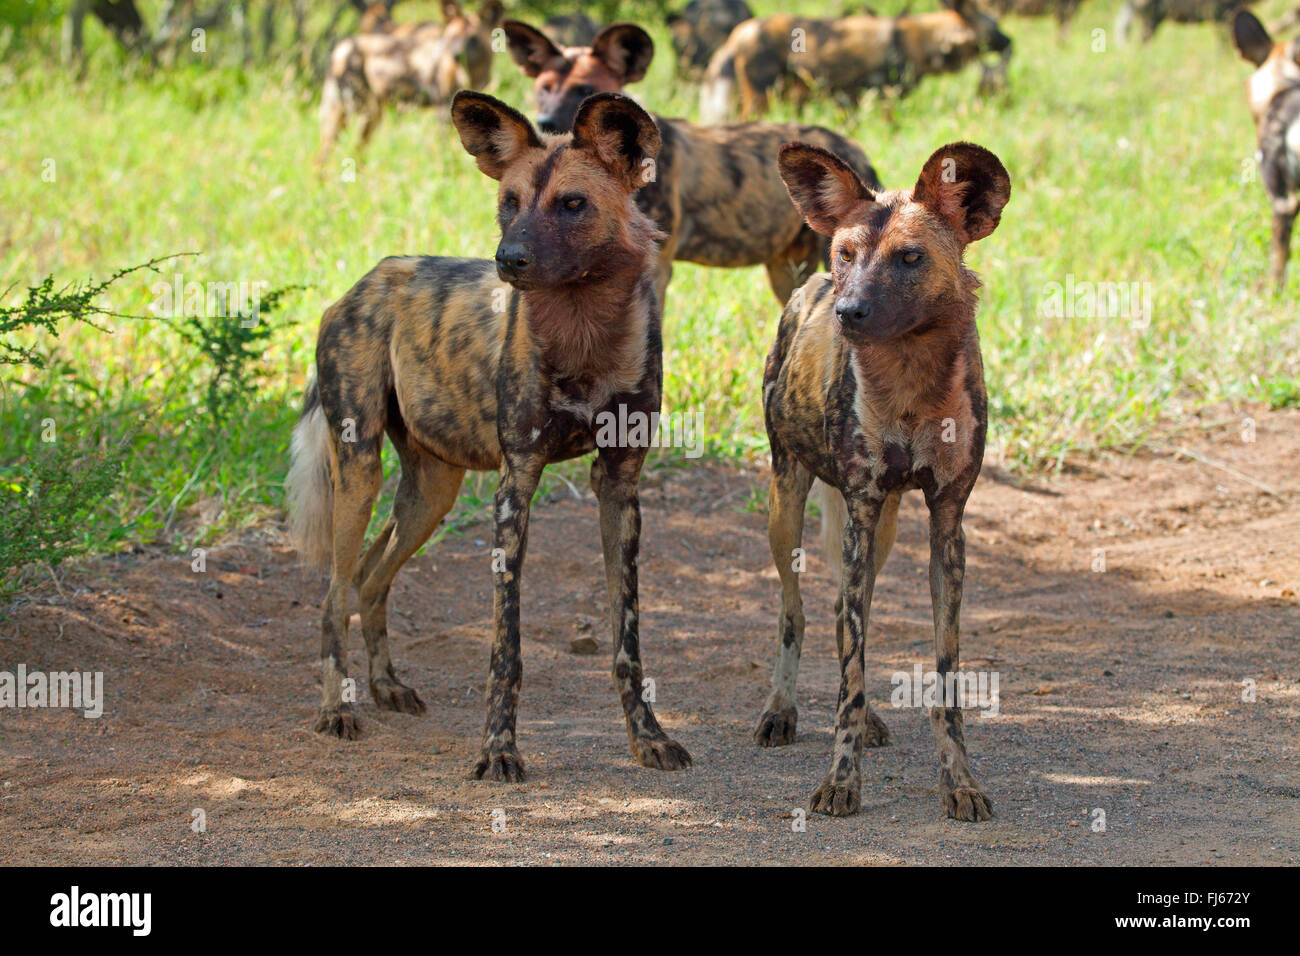 African wild dog, African hunting dog, Cape hunting dog, Painted dog, Painted wolf, Painted hunting dog, Spotted dog, Ornate wolf (Lycaon pictus), pack, South Africa, Krueger National Park Stock Photo